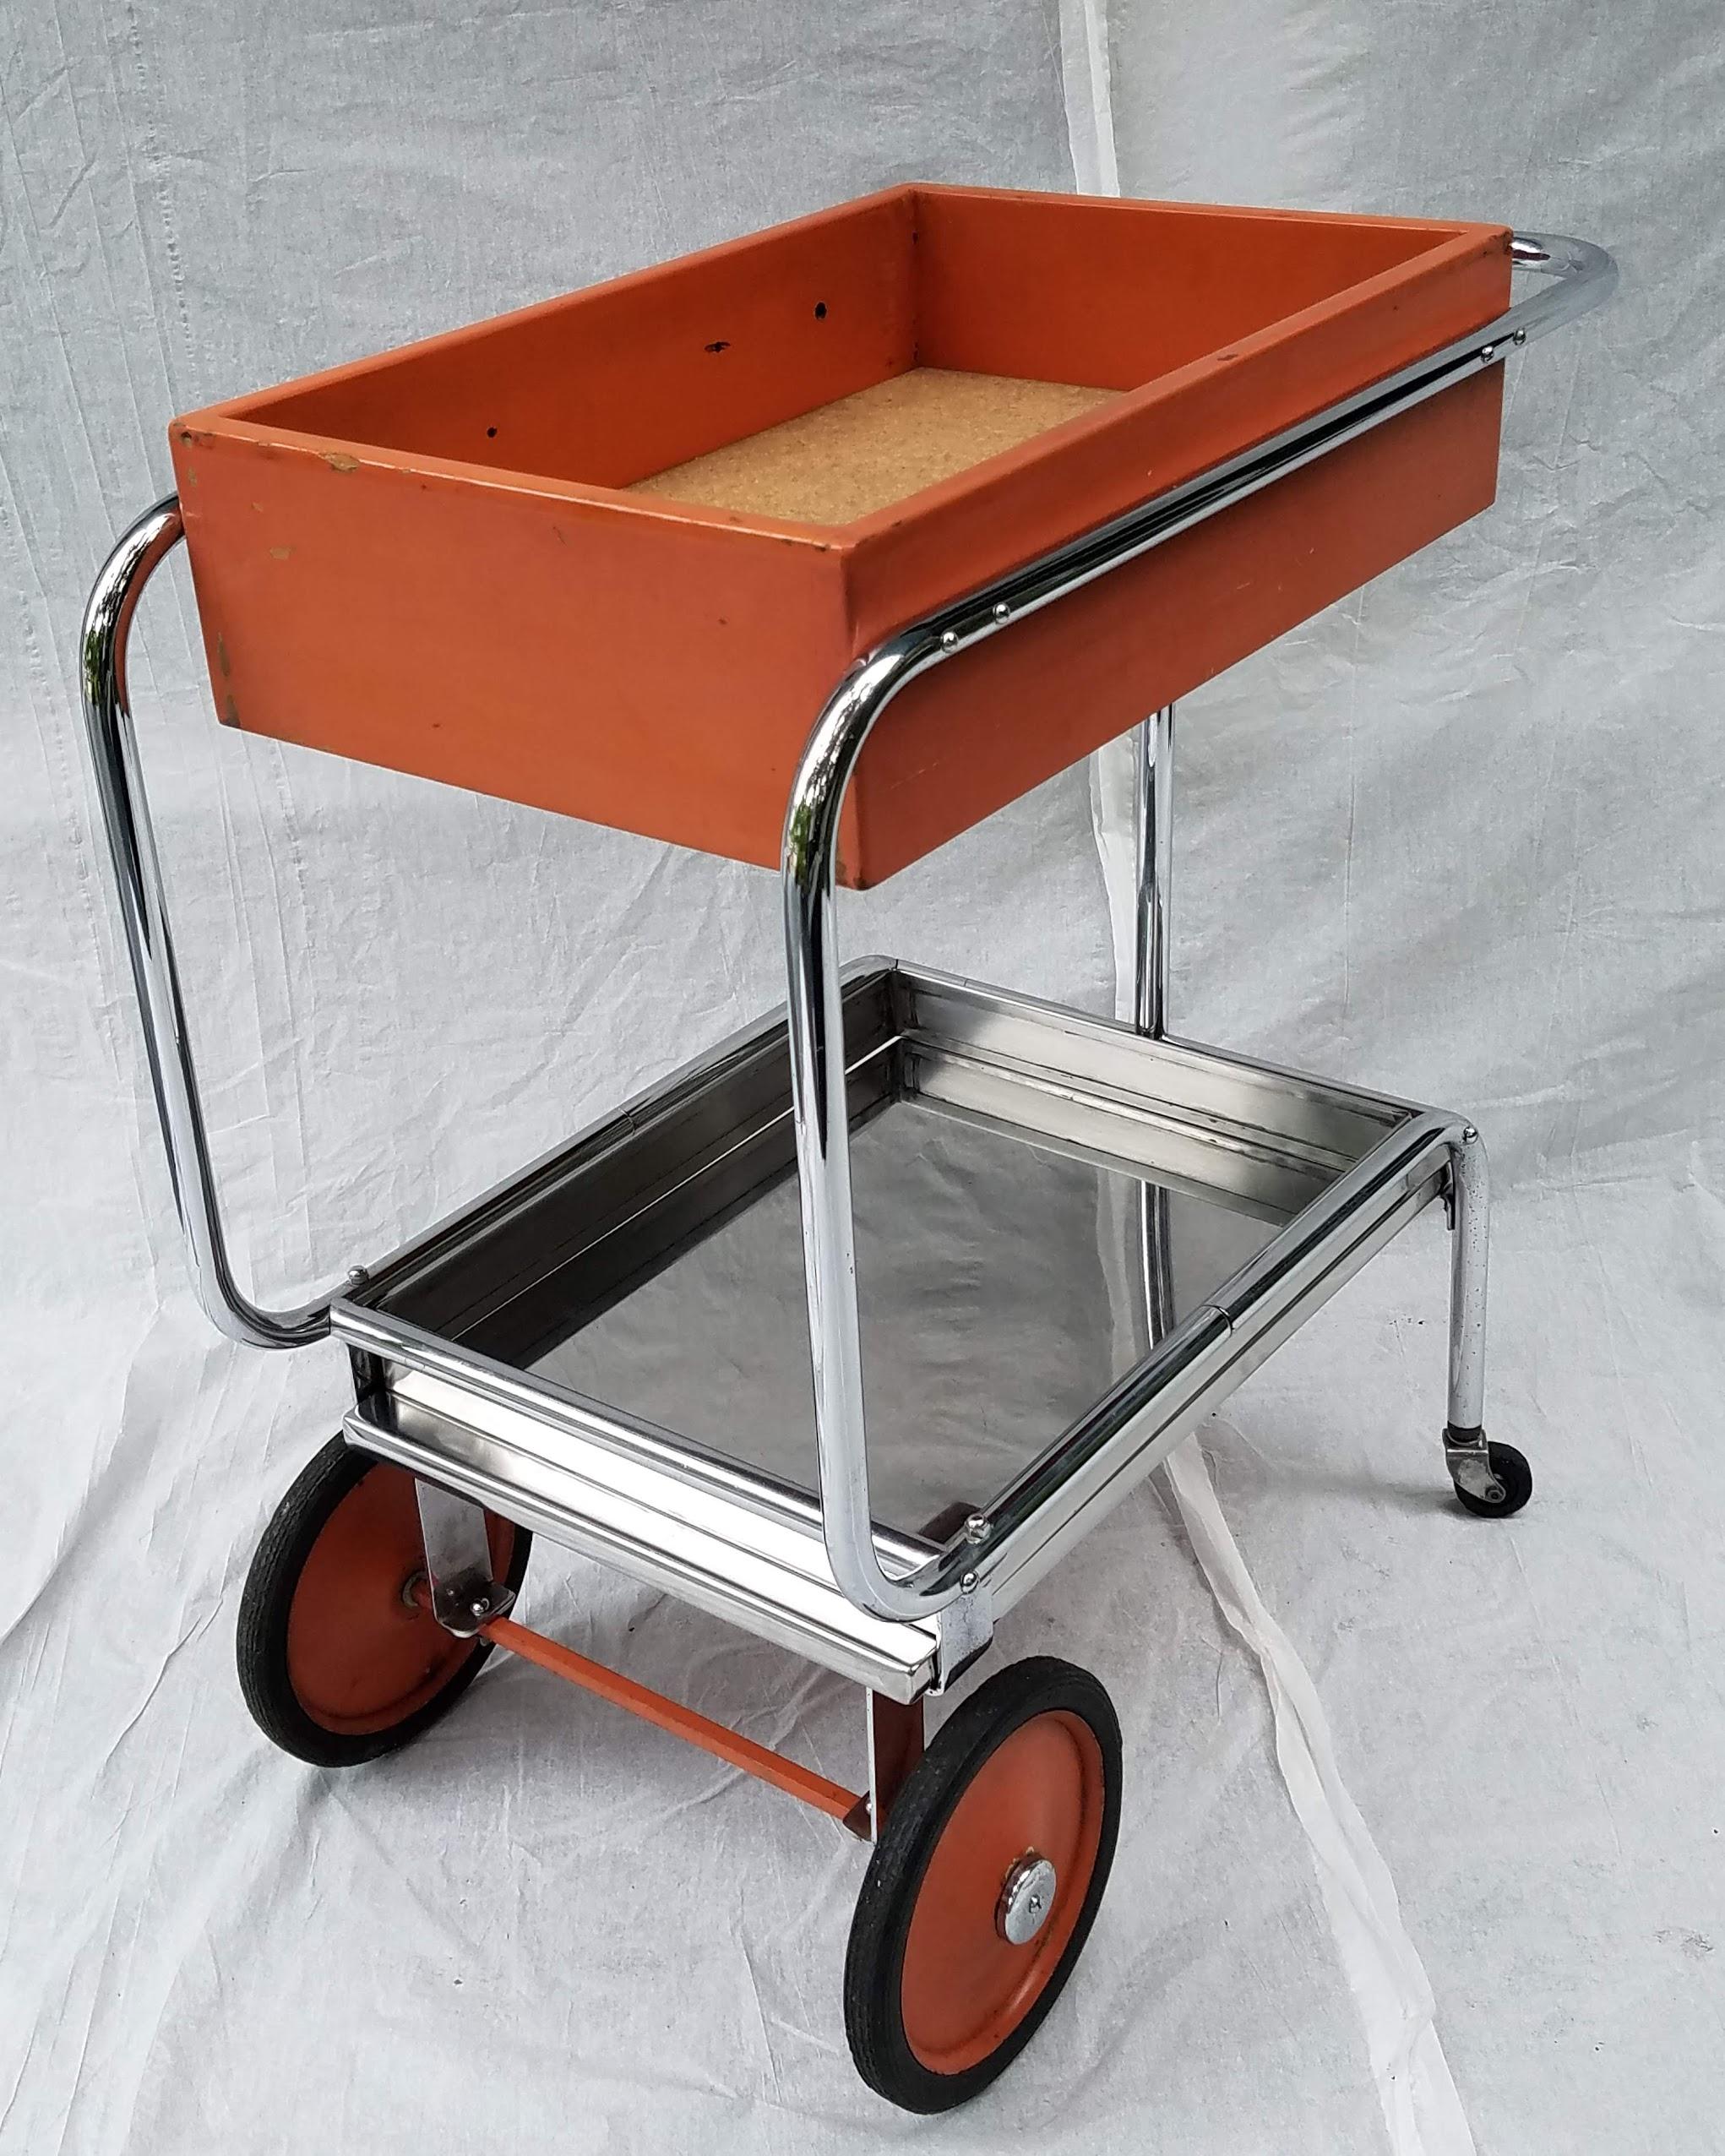 Rolling chrome bar cart designed by Gilbert Rohde for Troy Sunshade, circa 1933.
An example can be found in Steve Kenyon's archive of Gilbert Rohde's own magic lantern collection that is available on Flickr